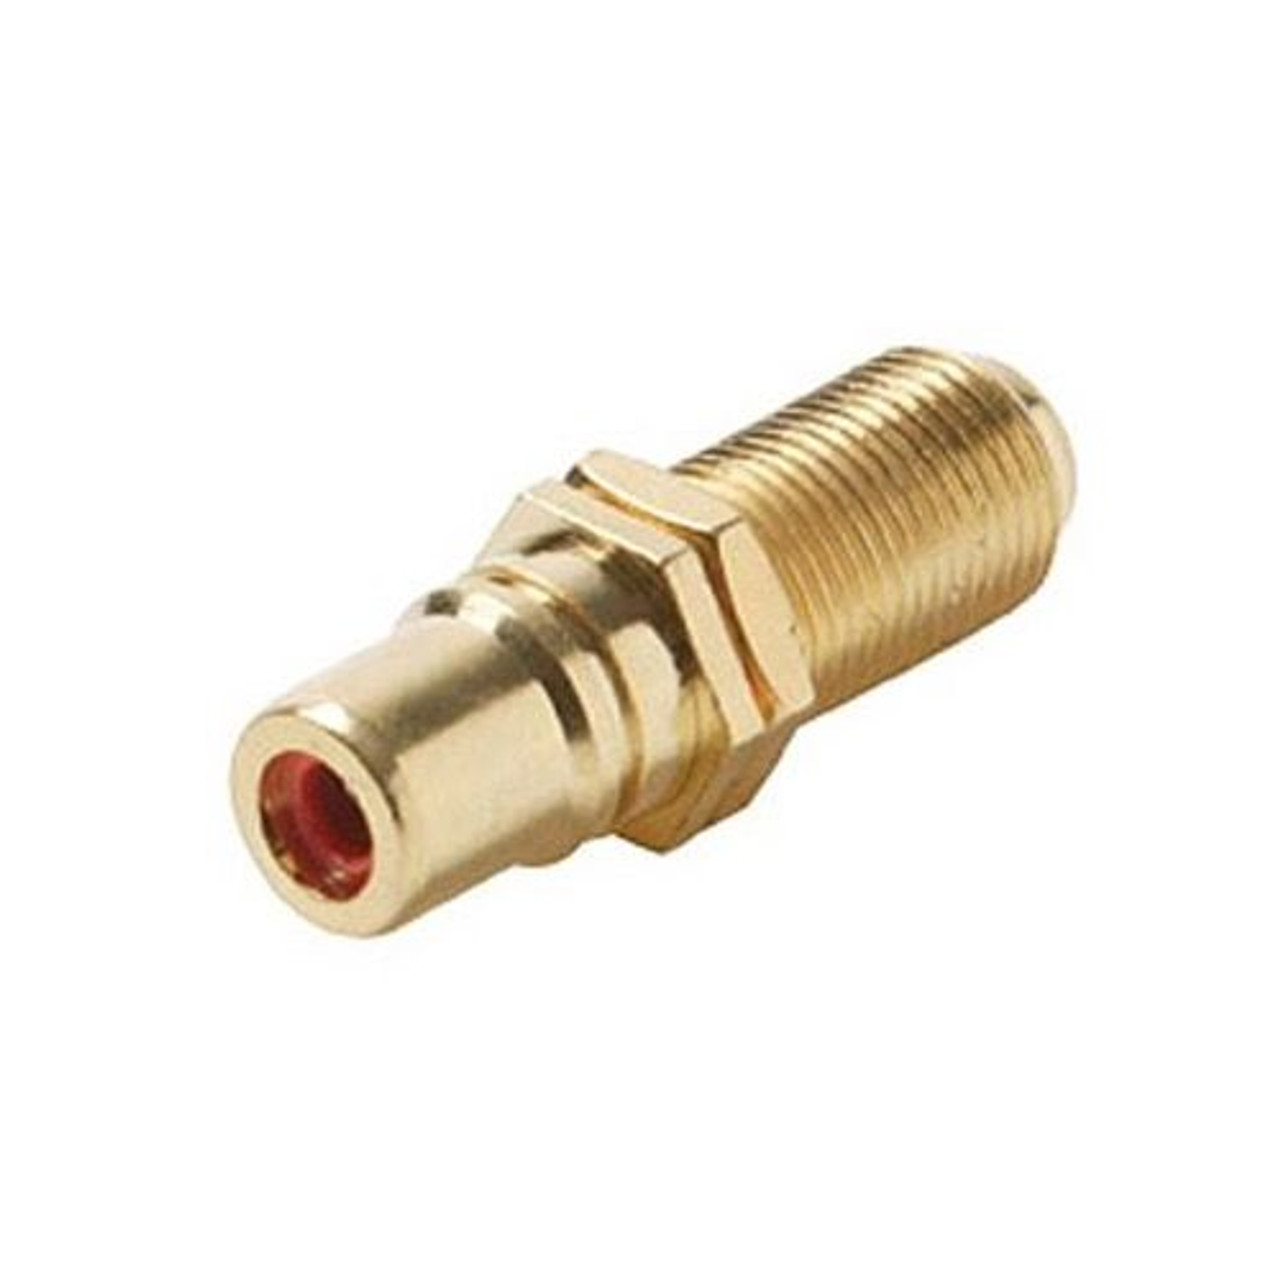 Eagle RCA Female To F Female Coupler Single Adapter Panel Mount RED BAND Gold Plated Connector Insert Wall Plate Coaxial to RCA Female Plug Jack 1 Component Connector